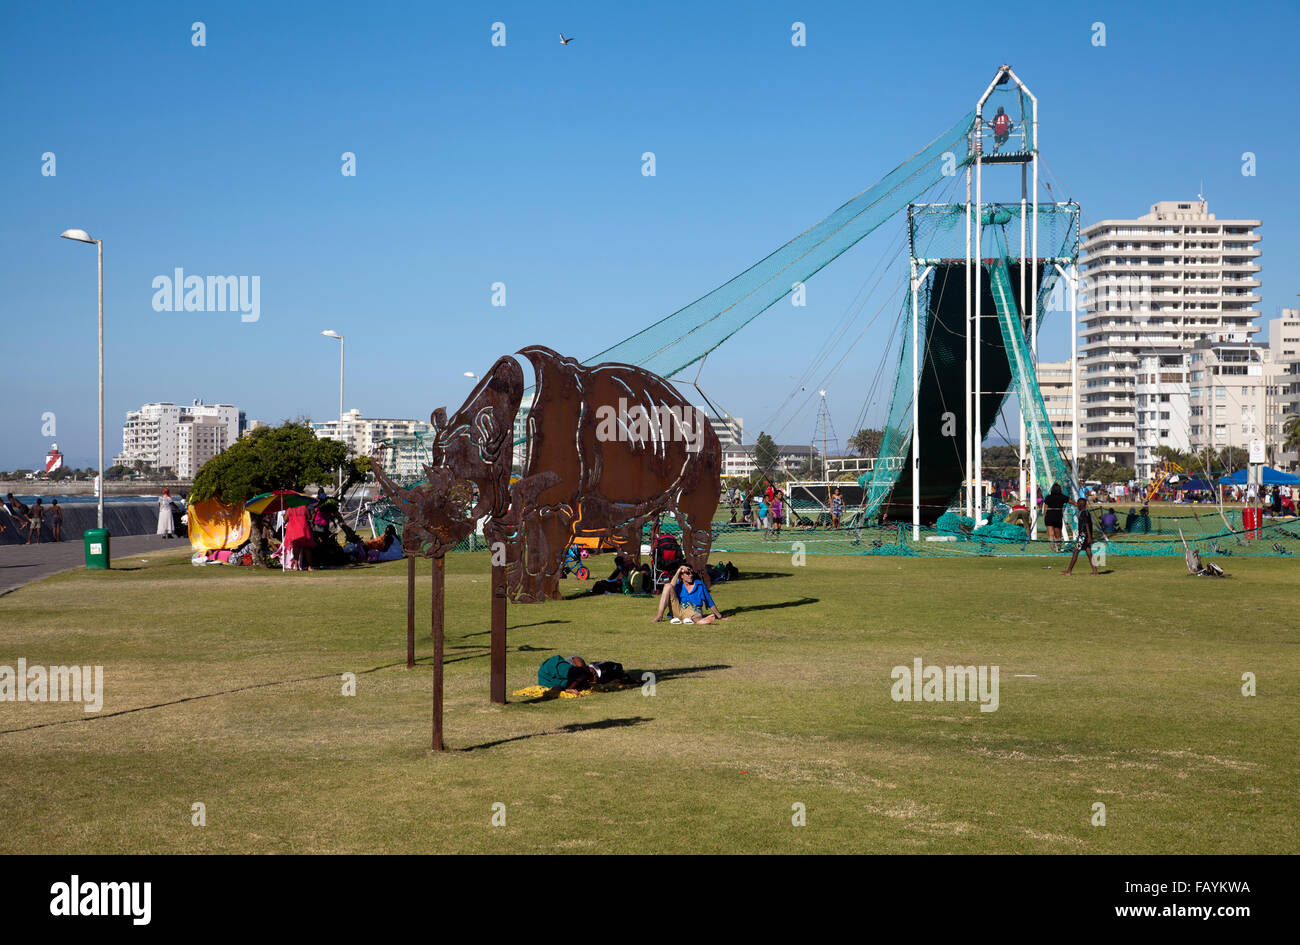 Circus School Slide and Netting and Art for Public on Sea Point Promenade Lawn in Sea Point - Cape Town - South Africa Stock Photo